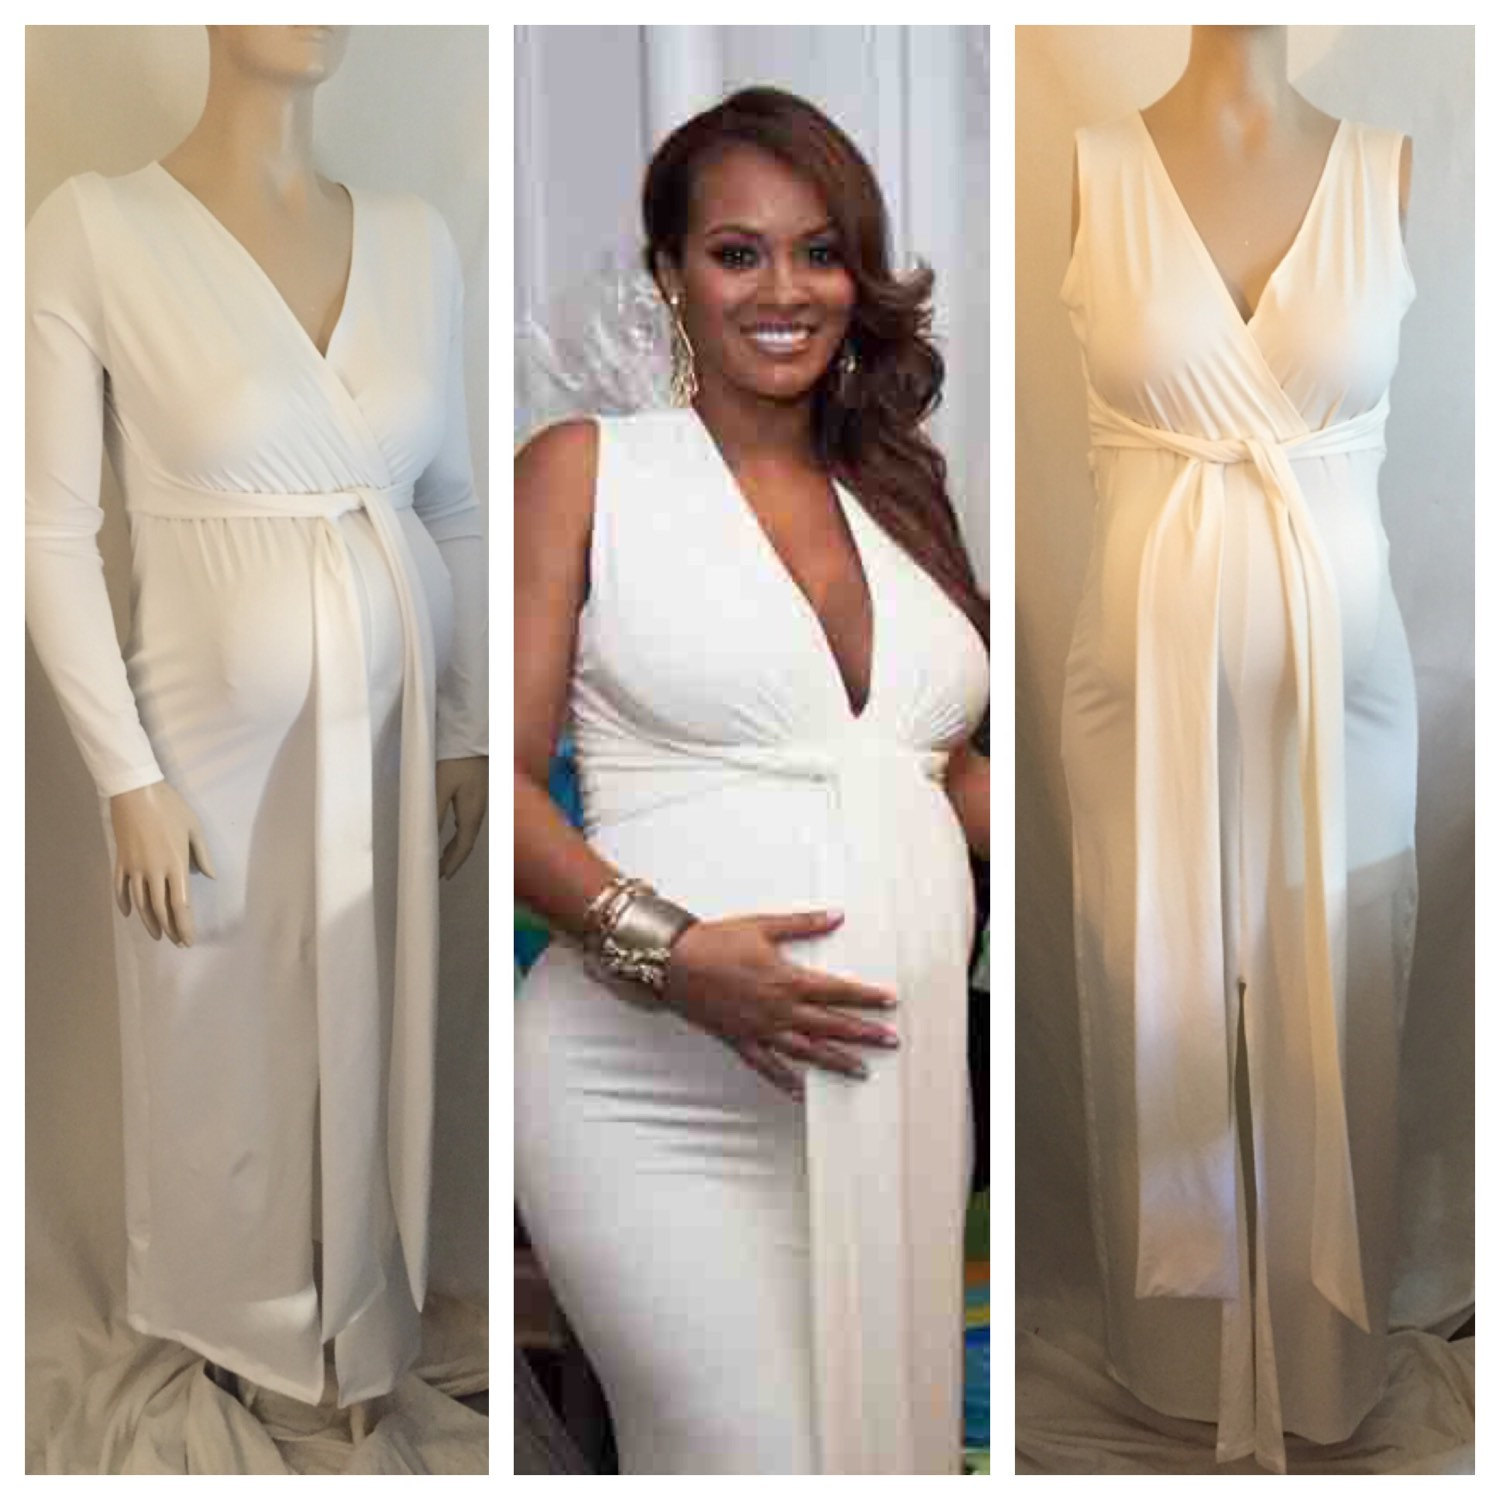 Full Size of Baby Shower:maternity Boutique Cute Maternity Dresses For Baby Shower Affordable Maternity Dresses For Baby Shower What To Wear To My Baby Shower Baby Shower Dresses For Winter Pink Maternity Dress Baby Shower Outfits For Dad Best Maternity Dresses For Baby Shower